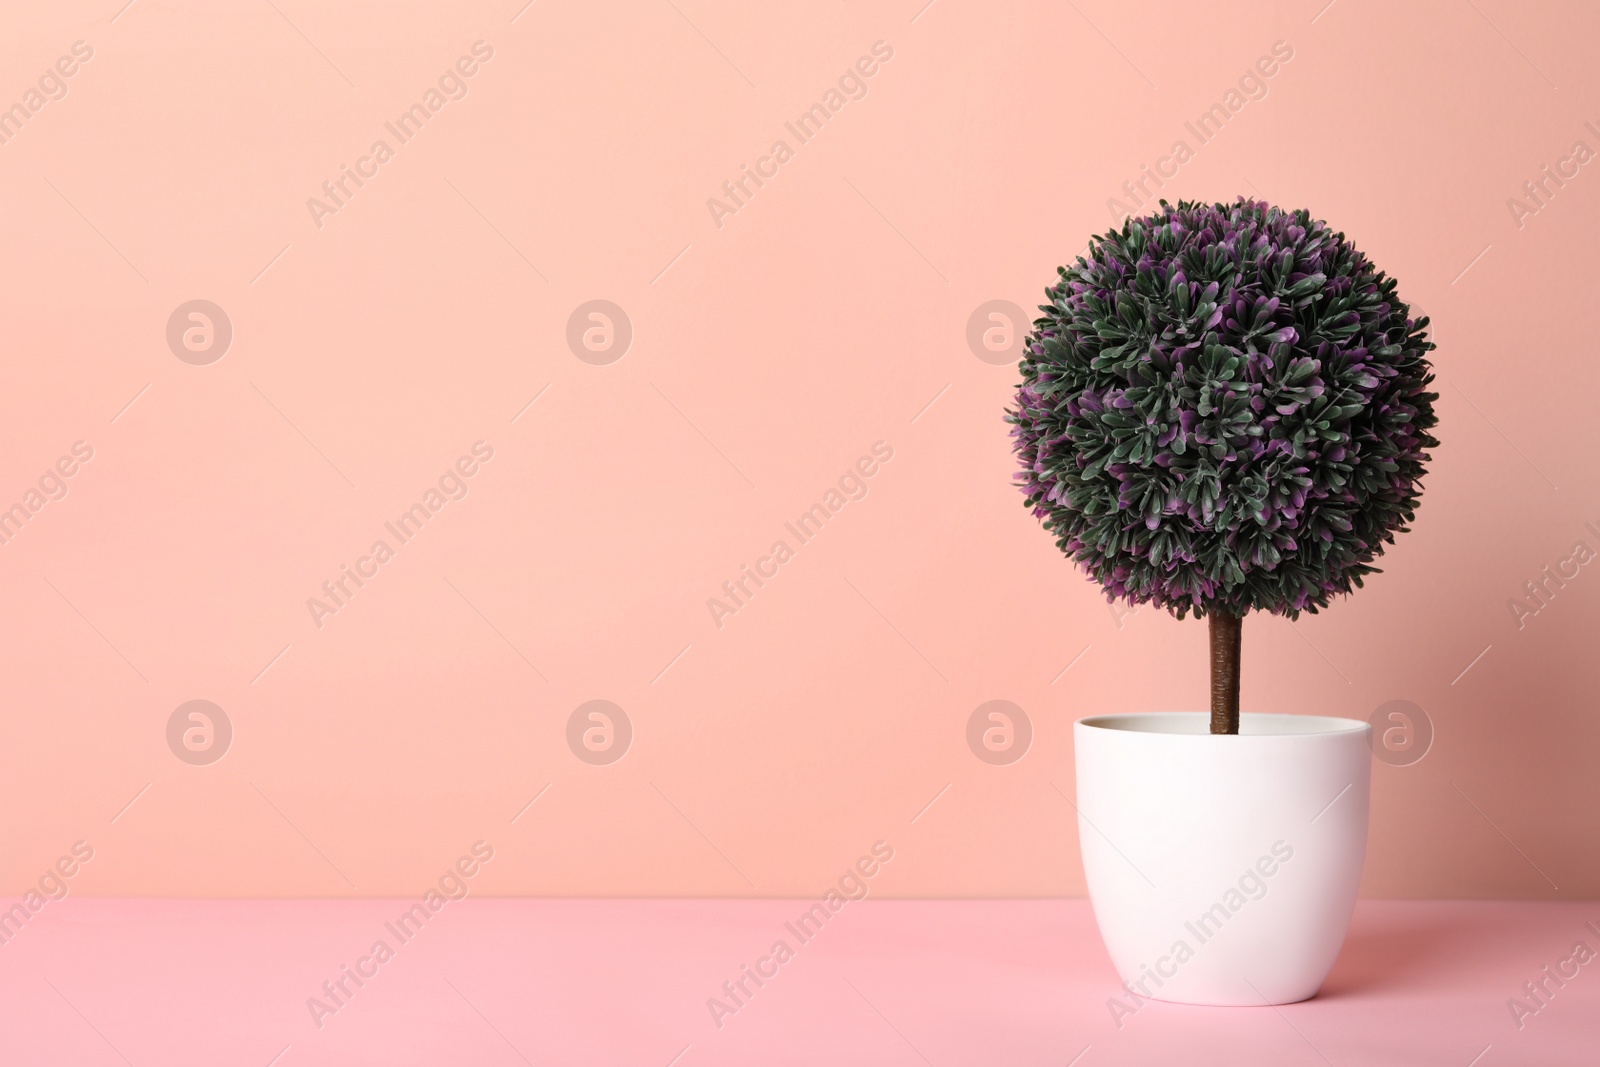 Photo of Artificial plant in flower pot on pink background. Space for text